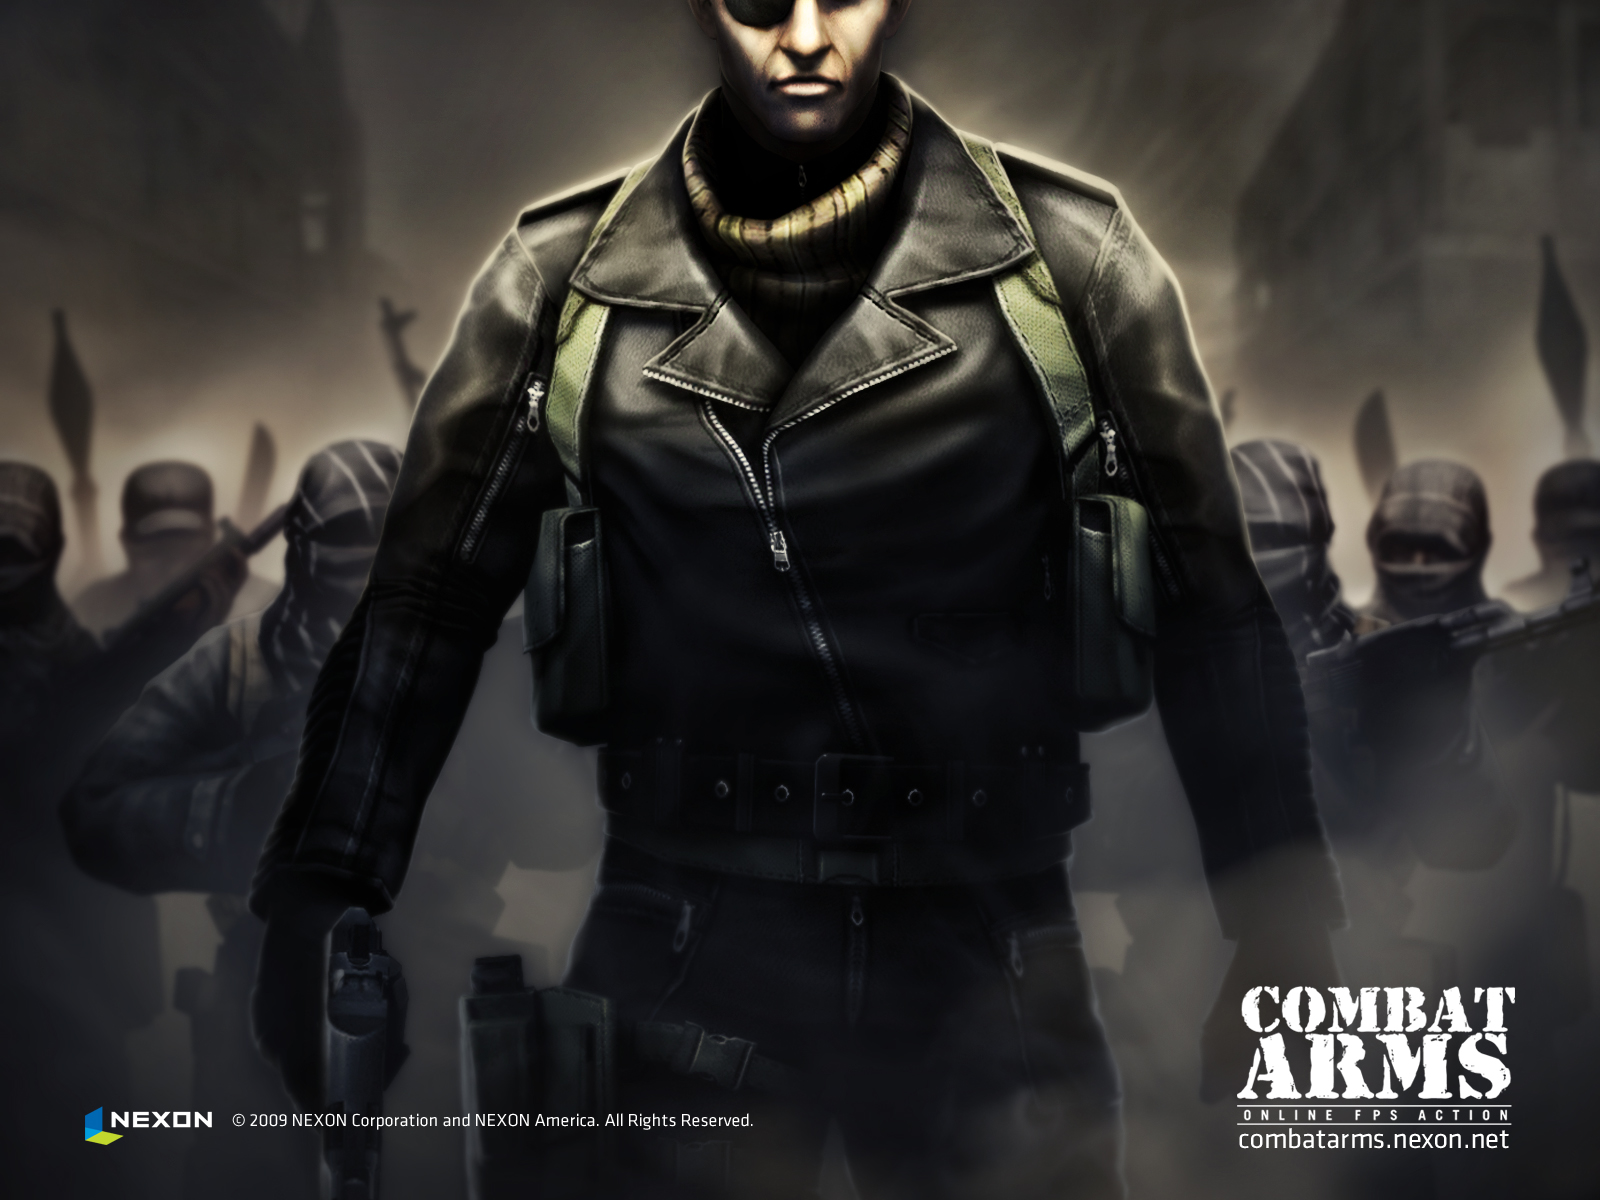 combat arms wallpaper,action adventure game,movie,action film,action figure,pc game